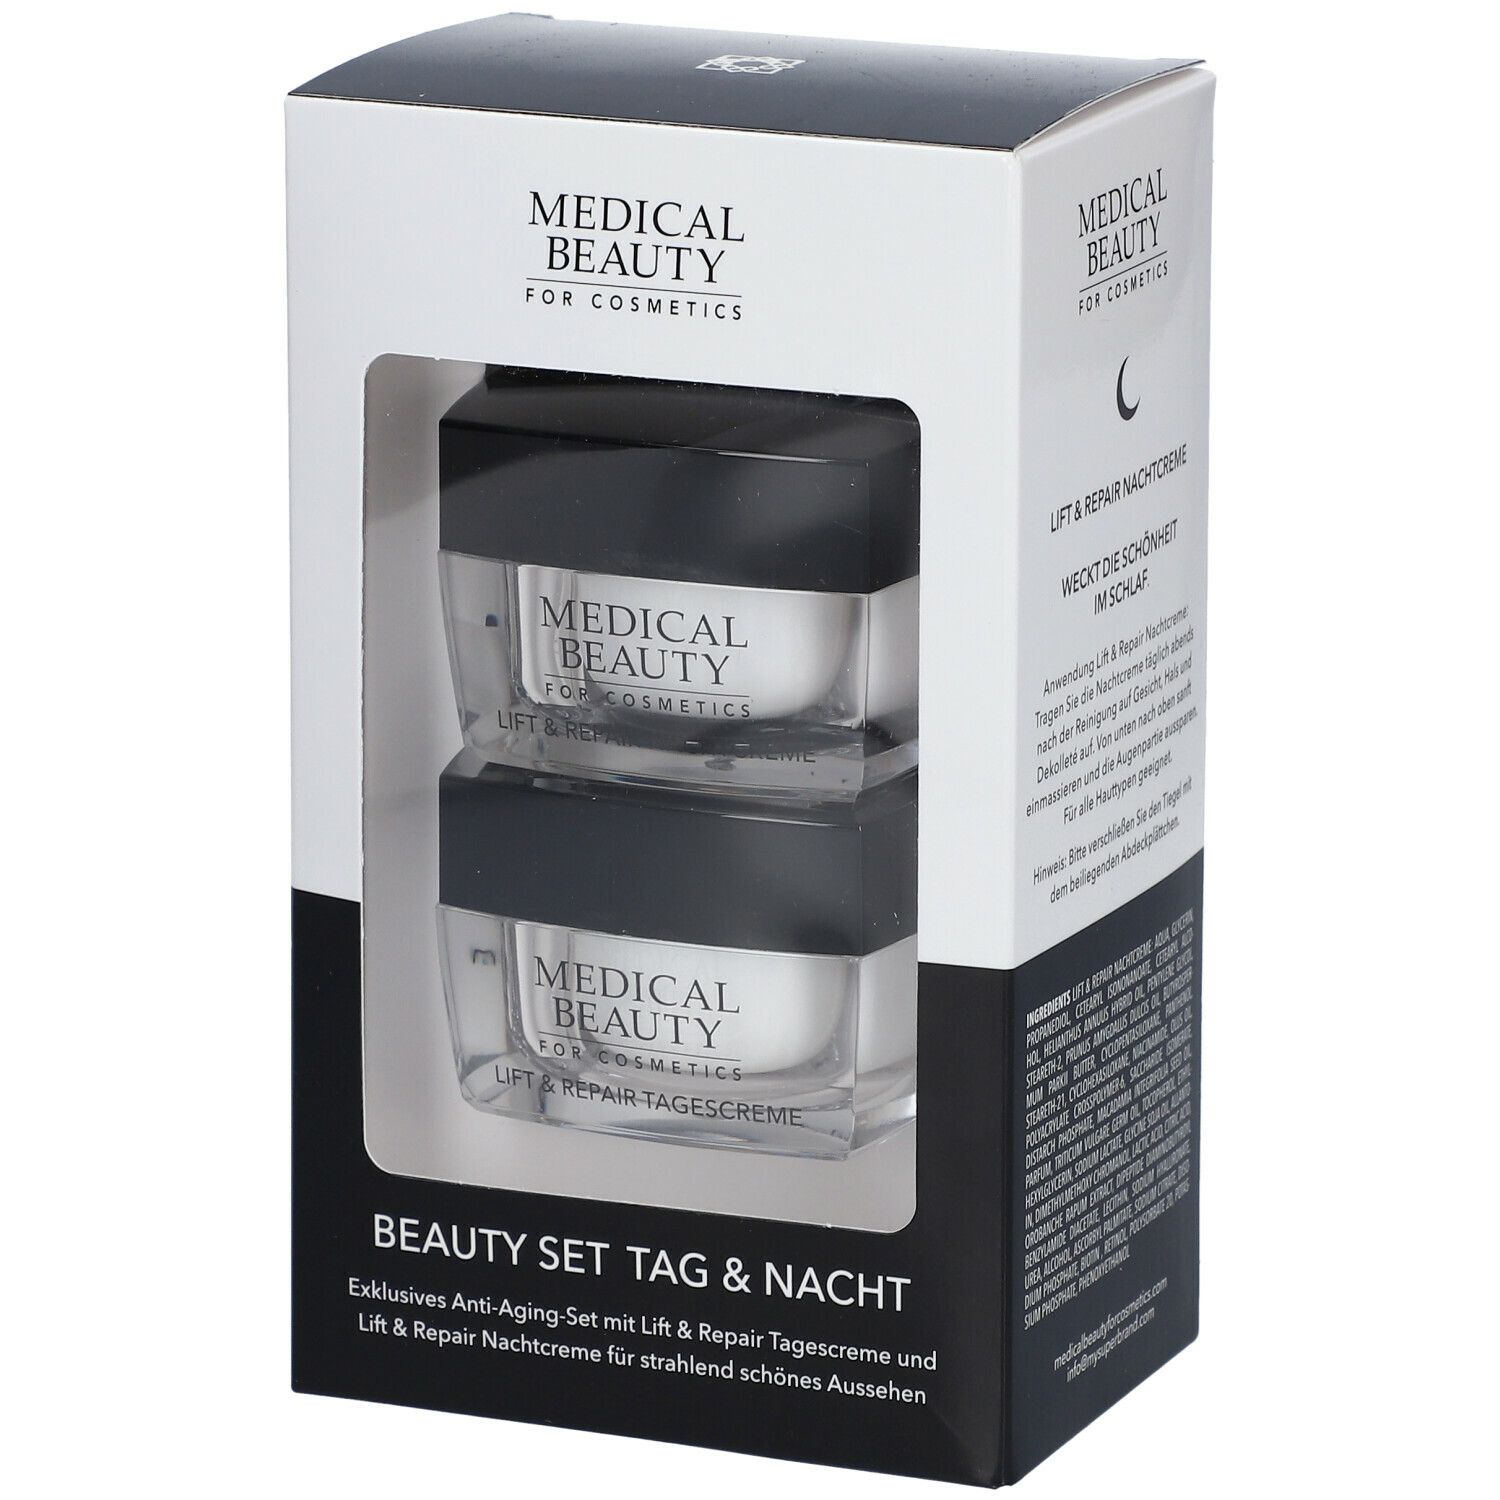 MEDICAL BEAUTY Lift & Repair Tages- und Nachtcreme